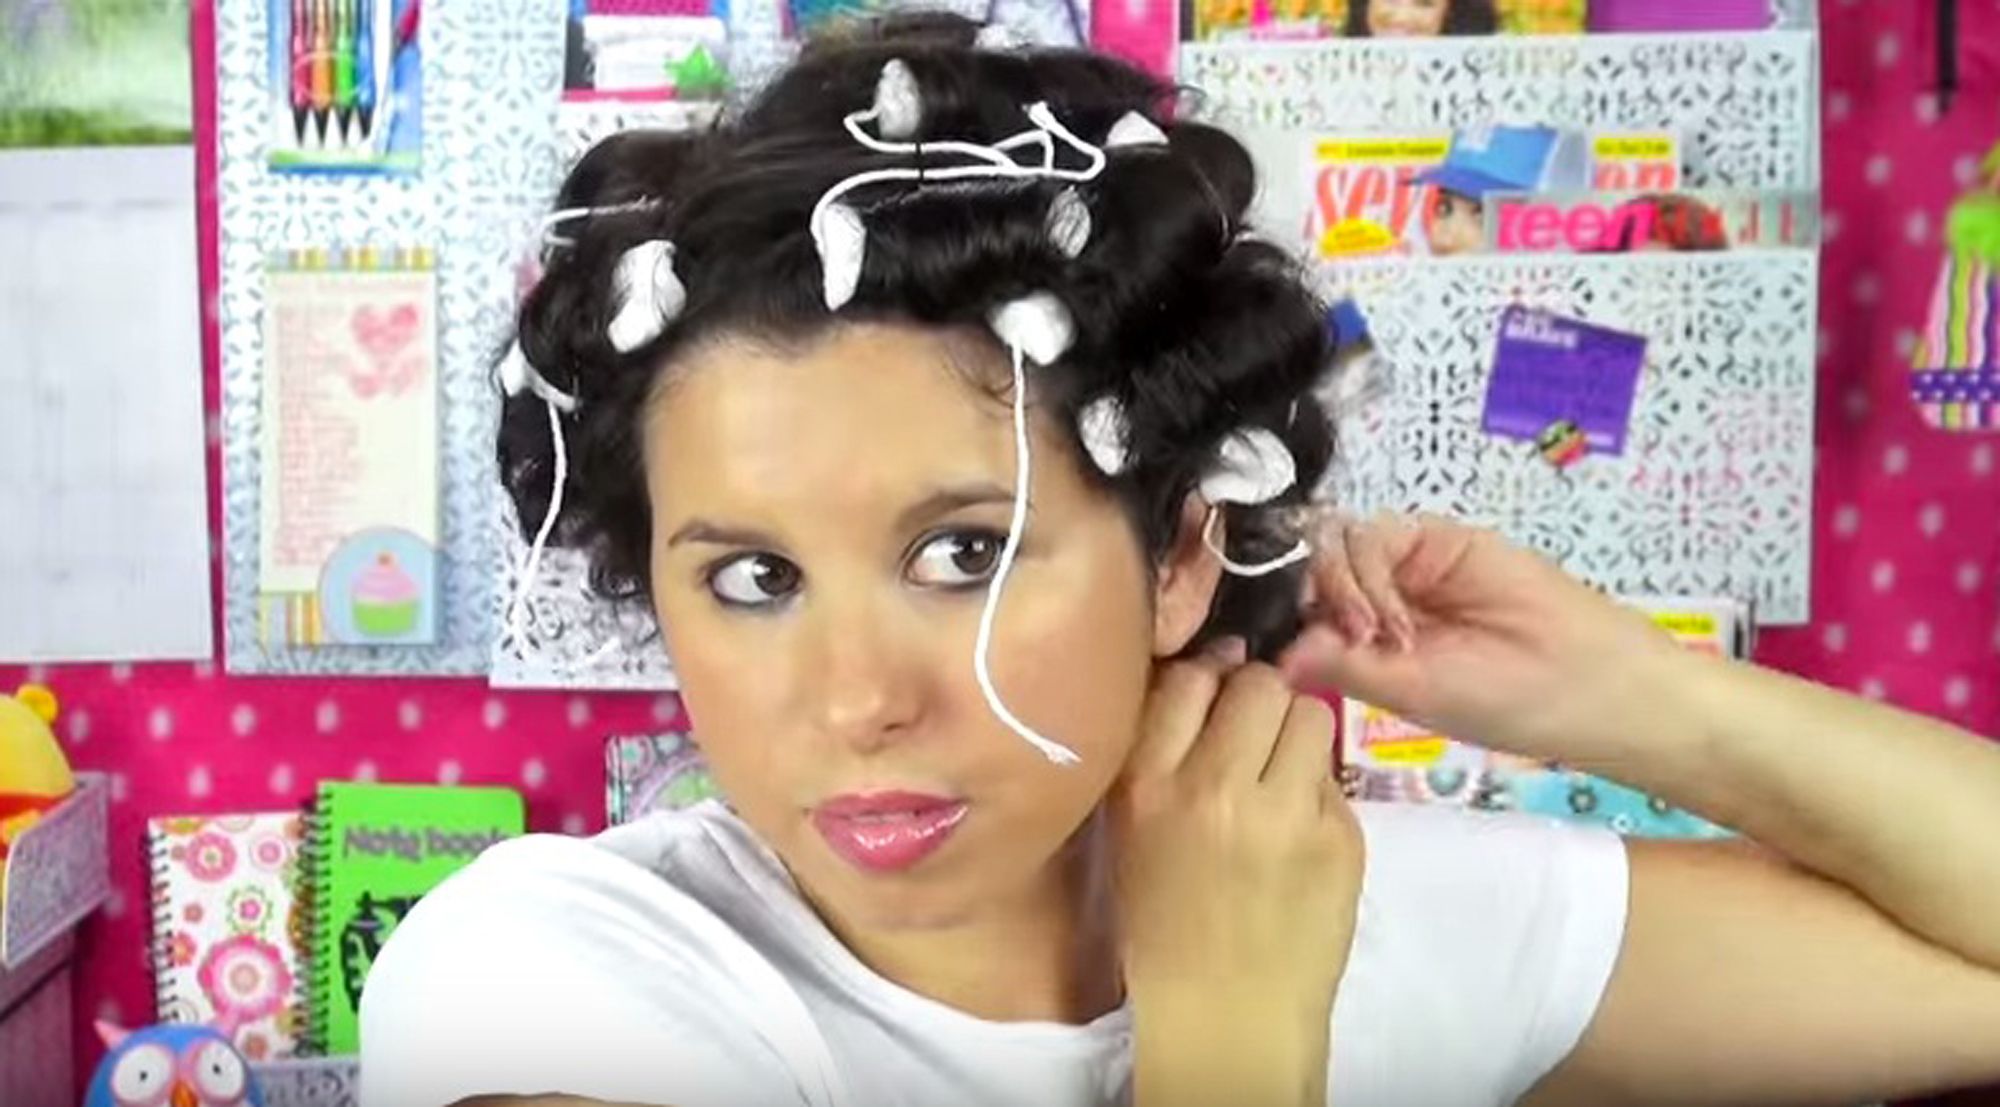 Apparently you can curl your hair with tampons and pads